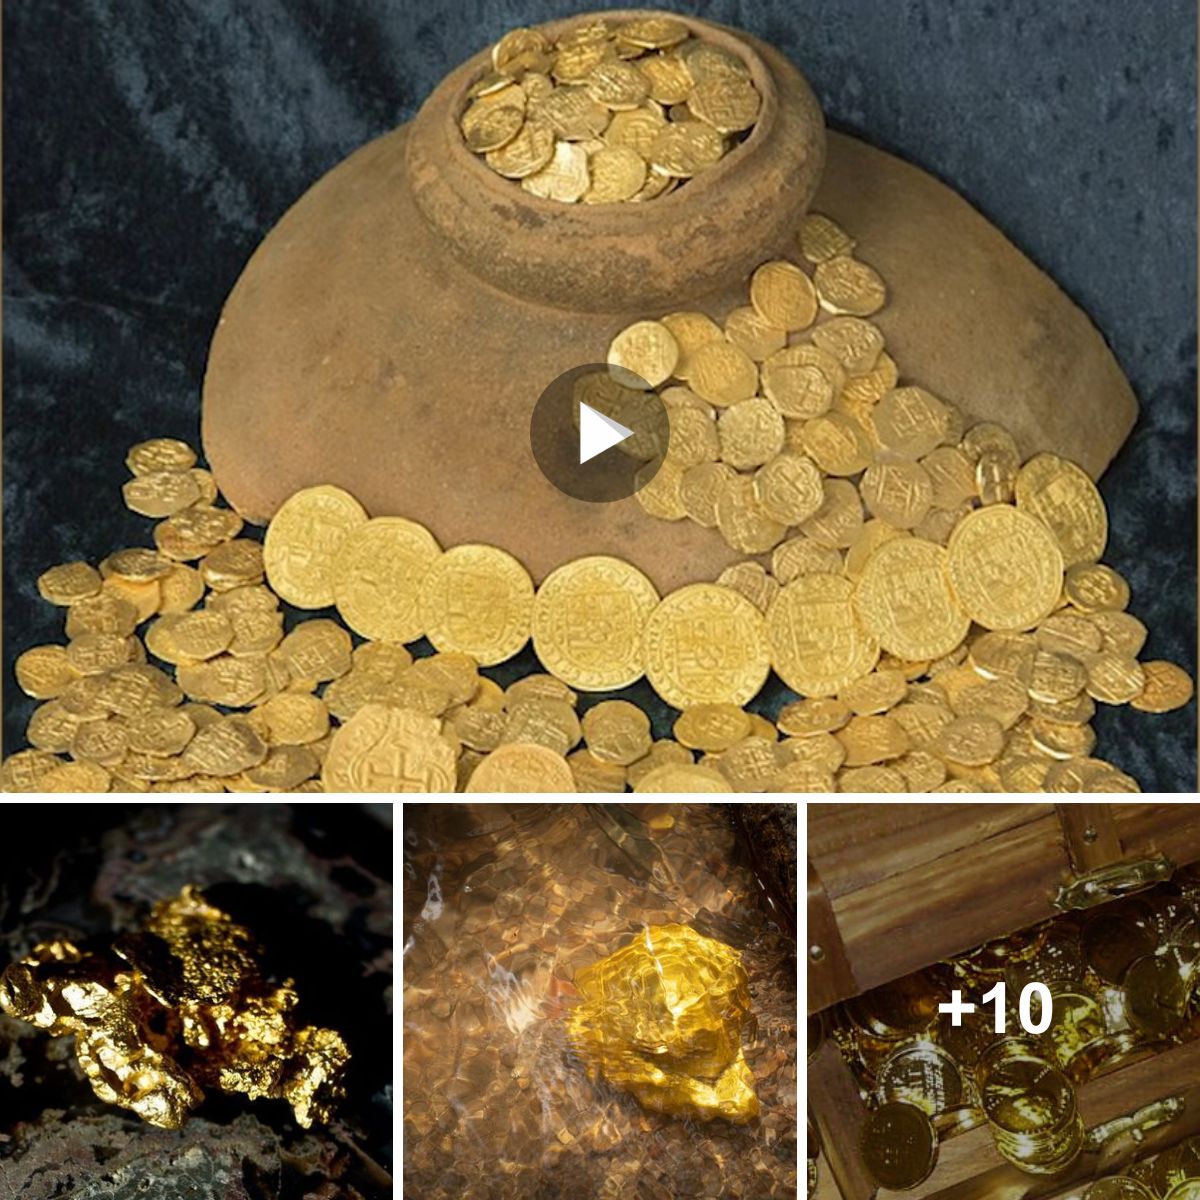  Treasure Hunting Beneath the Ocean: Discovering Enormous Gold Reserves and Ancient Gold Coins